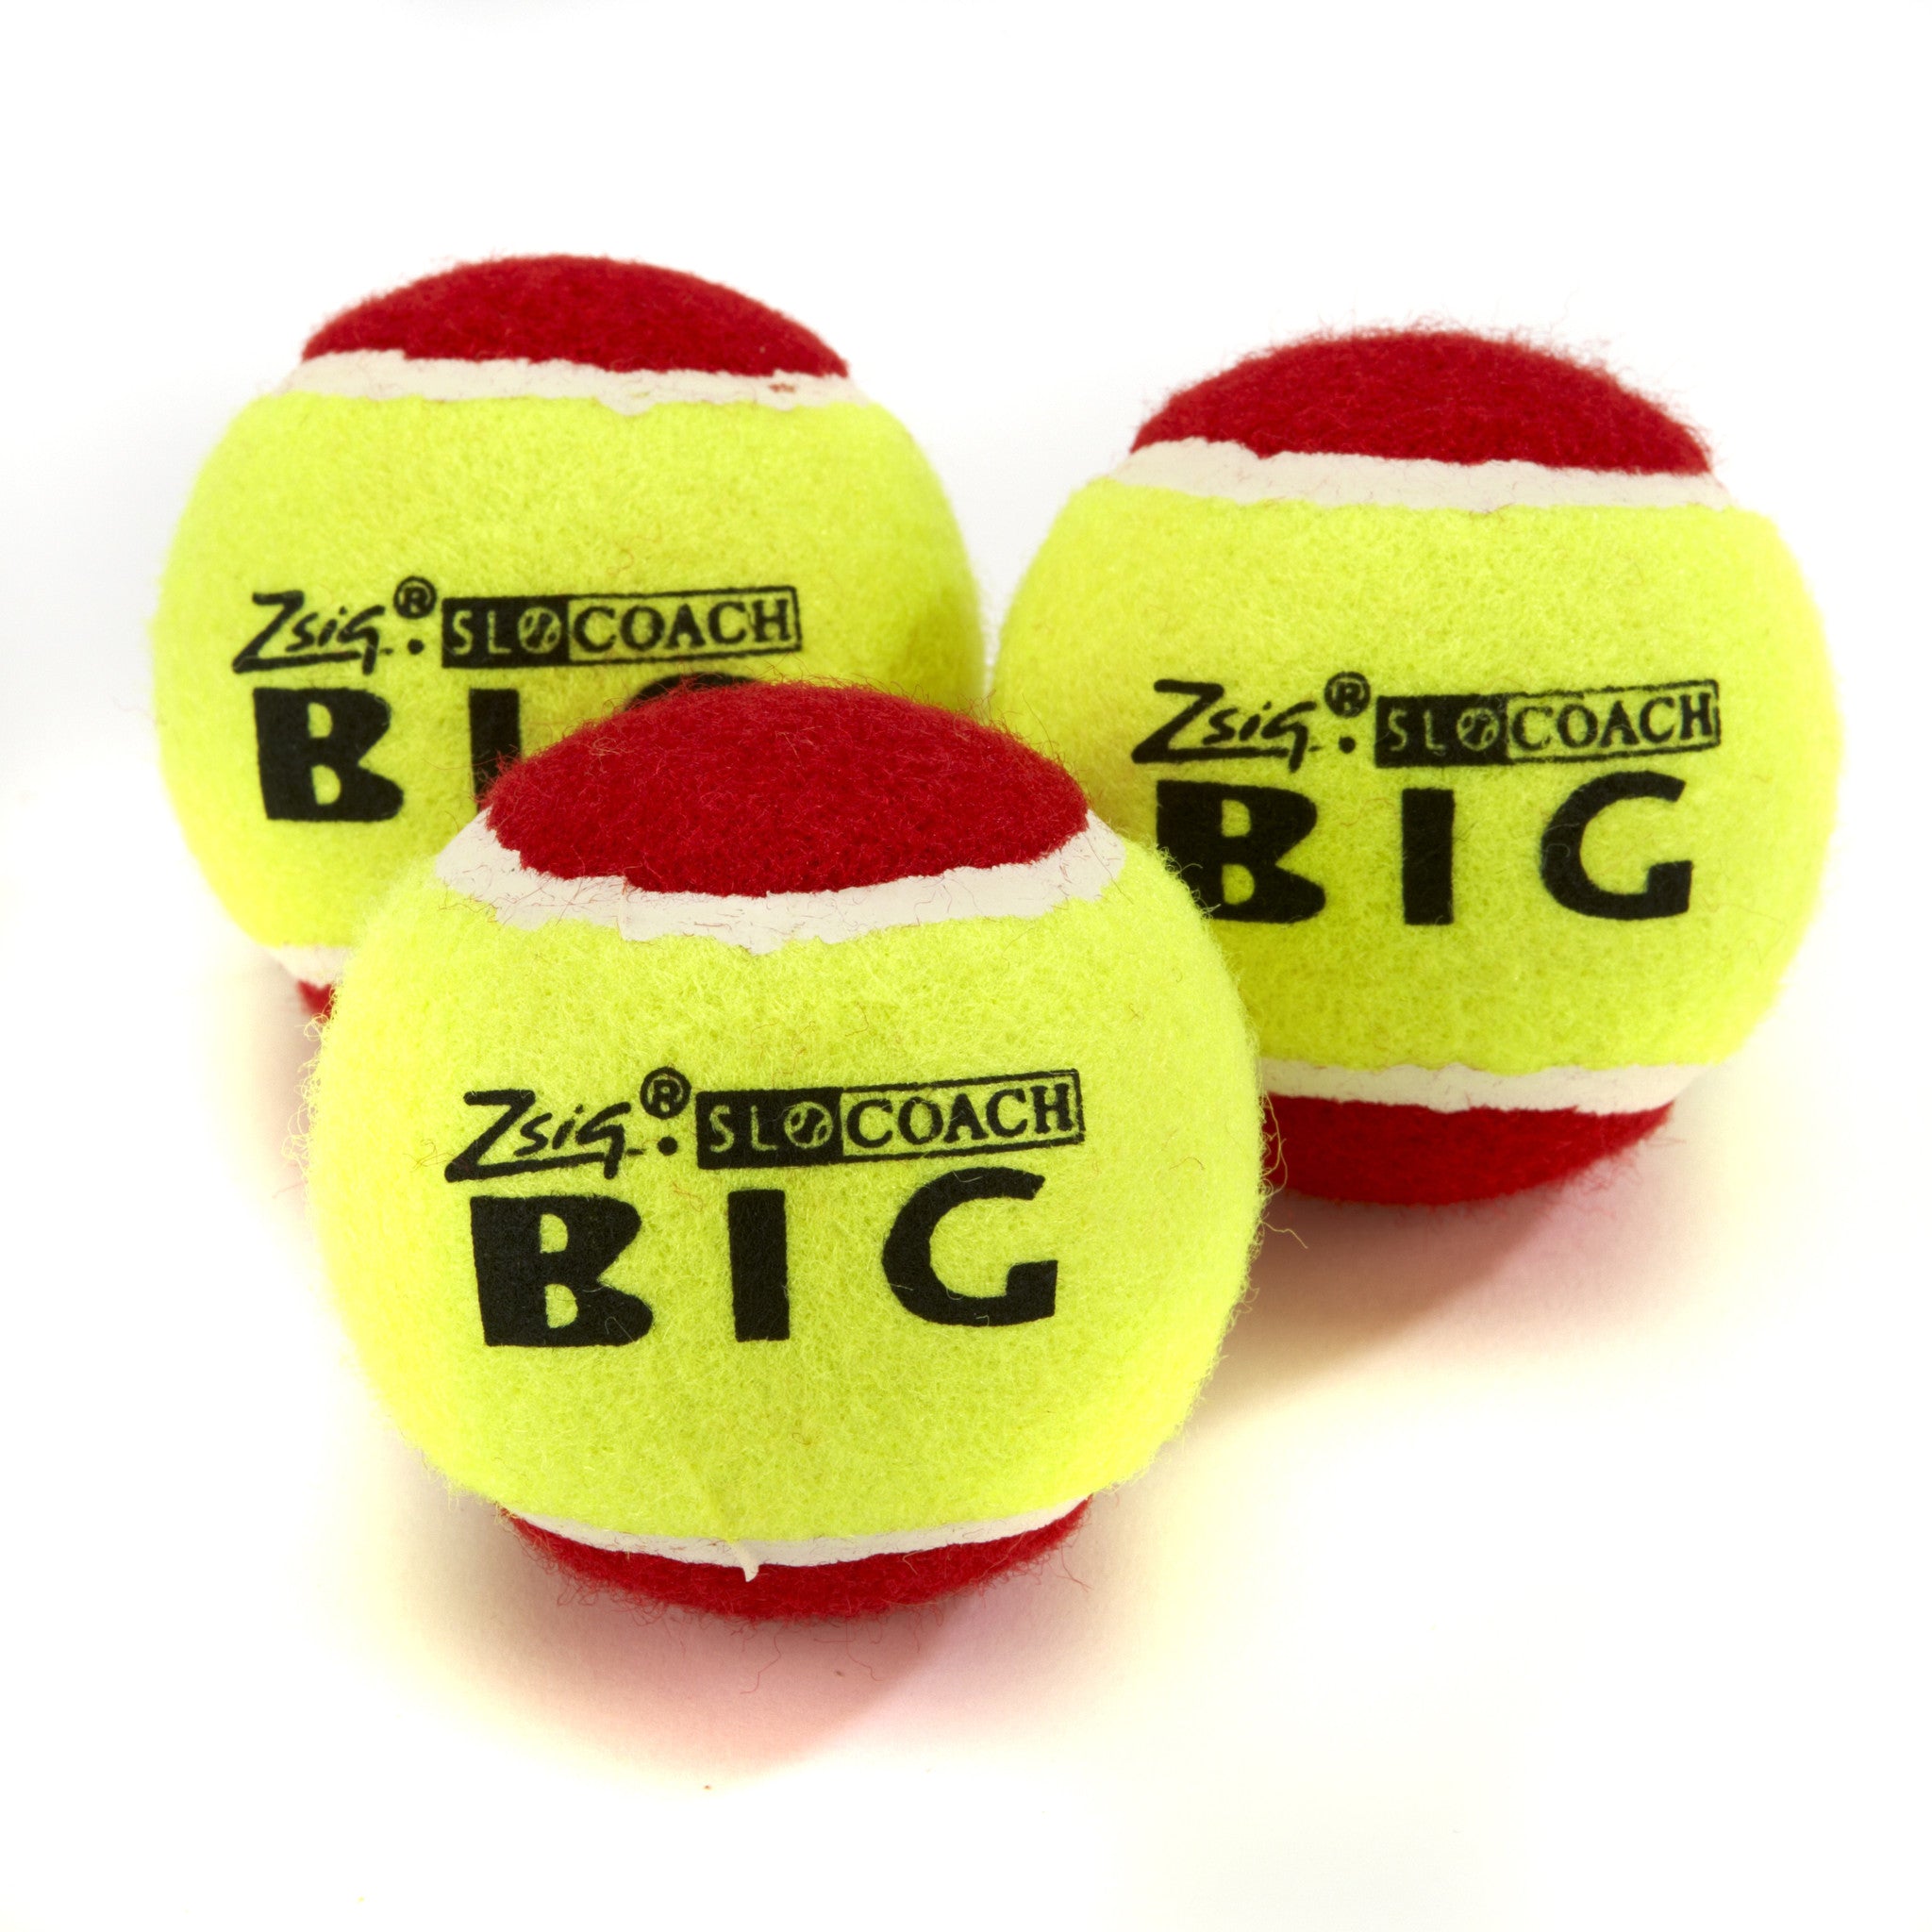 Three Zsig Mini Tennis Balls, Slocoach Big Red over-sized low compression ball